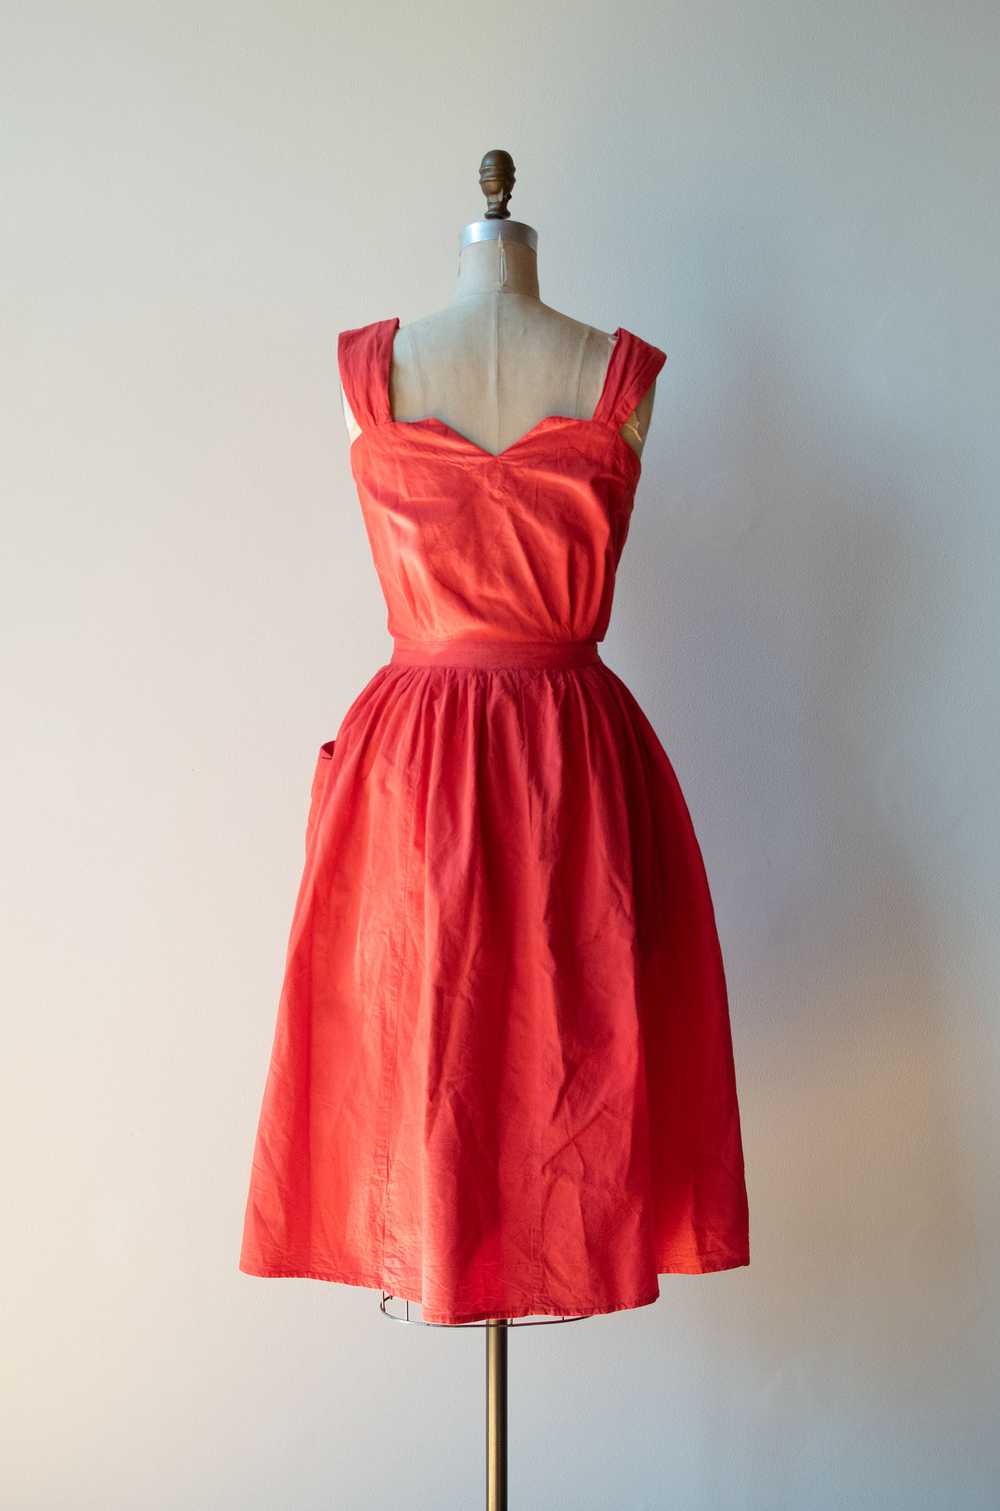 1980s Red Tie Front Dress - image 3